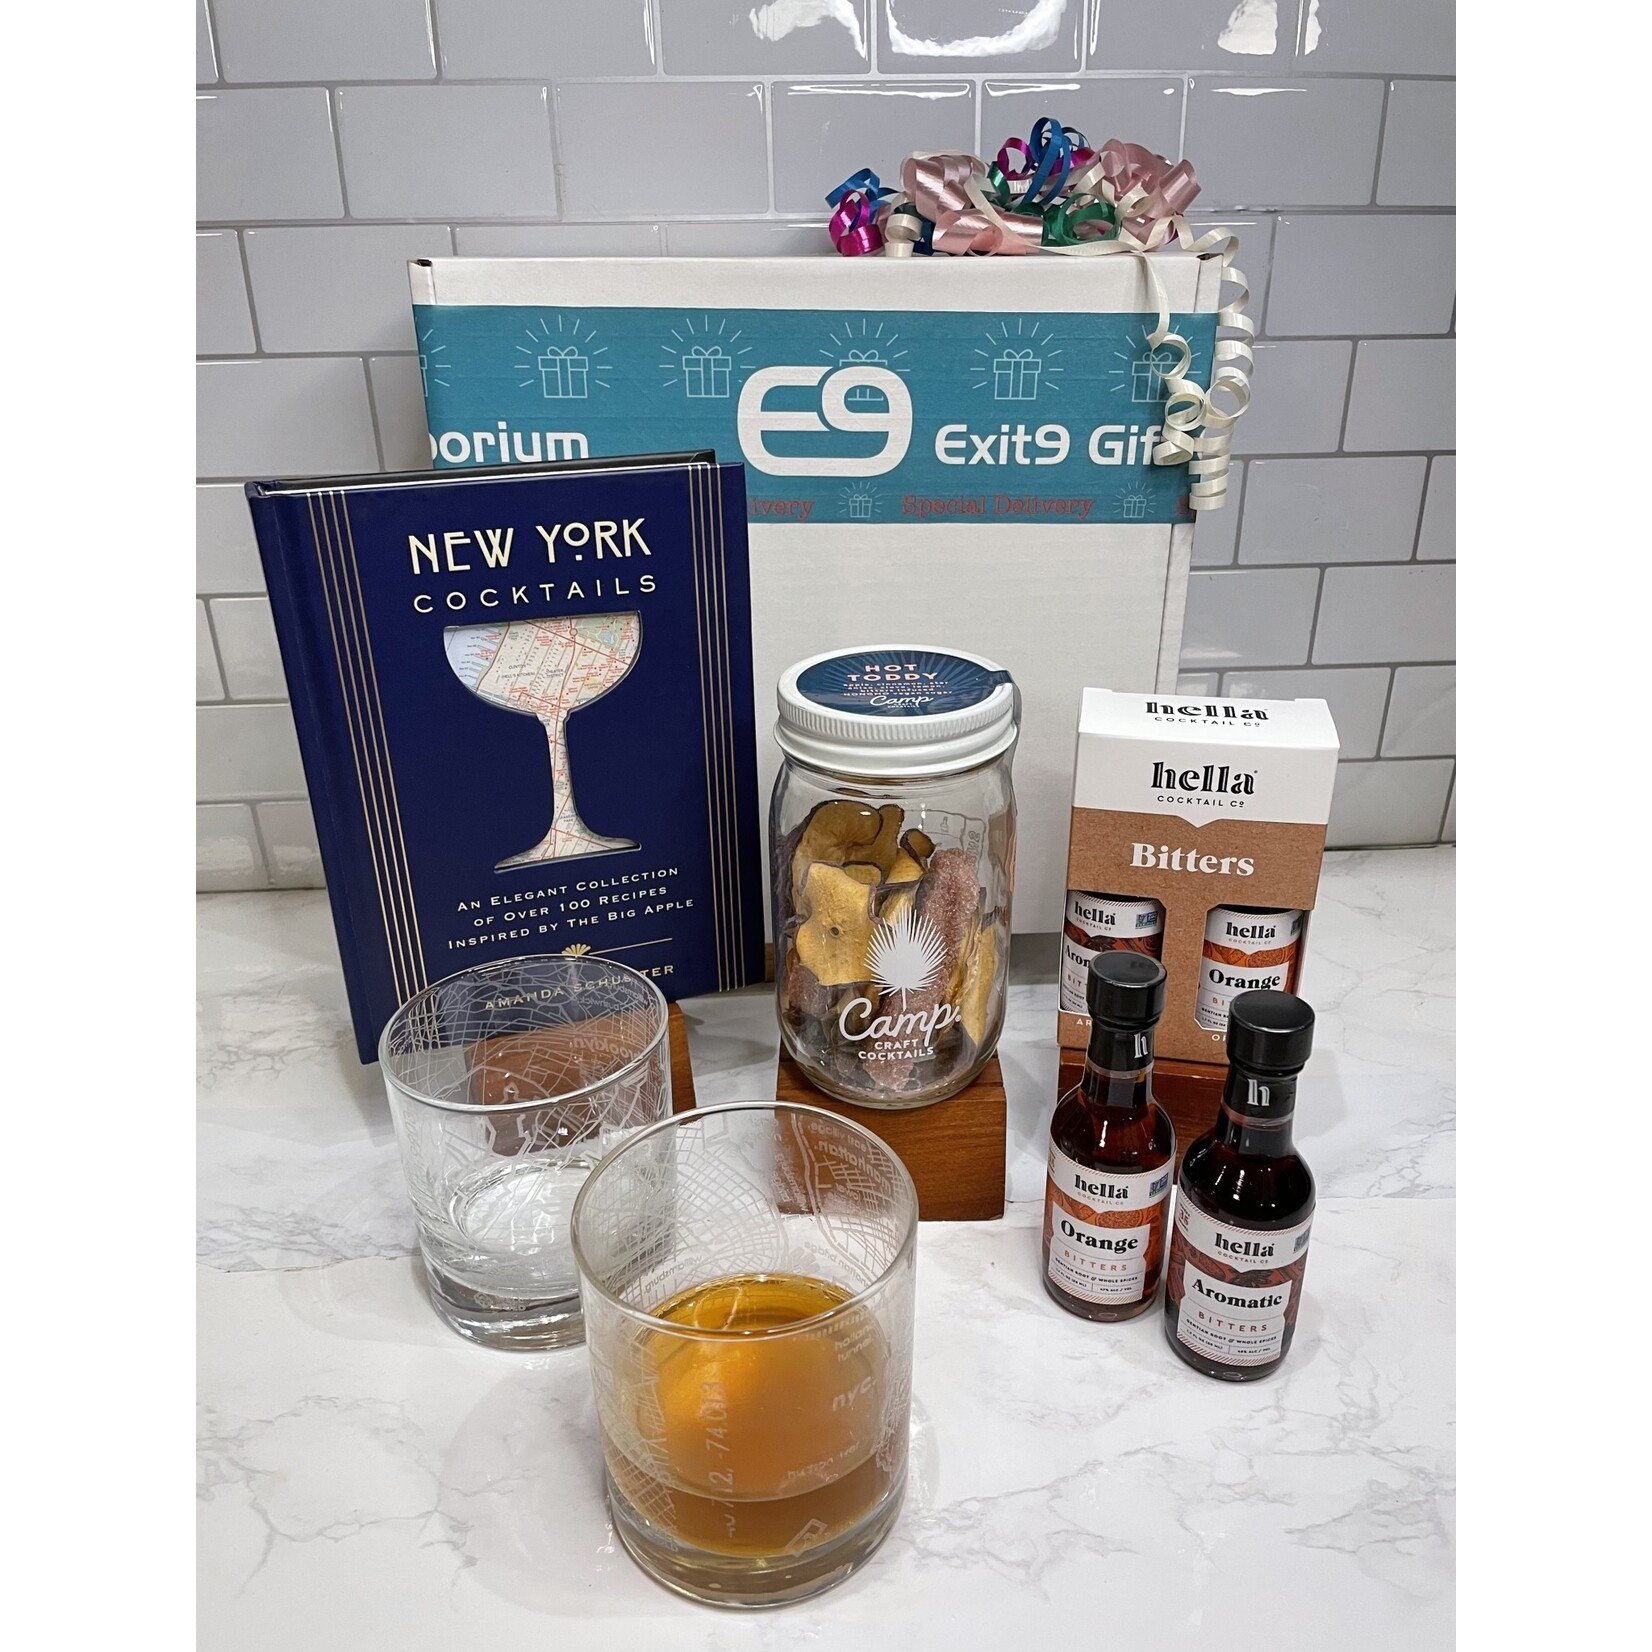 The Mixology Gift